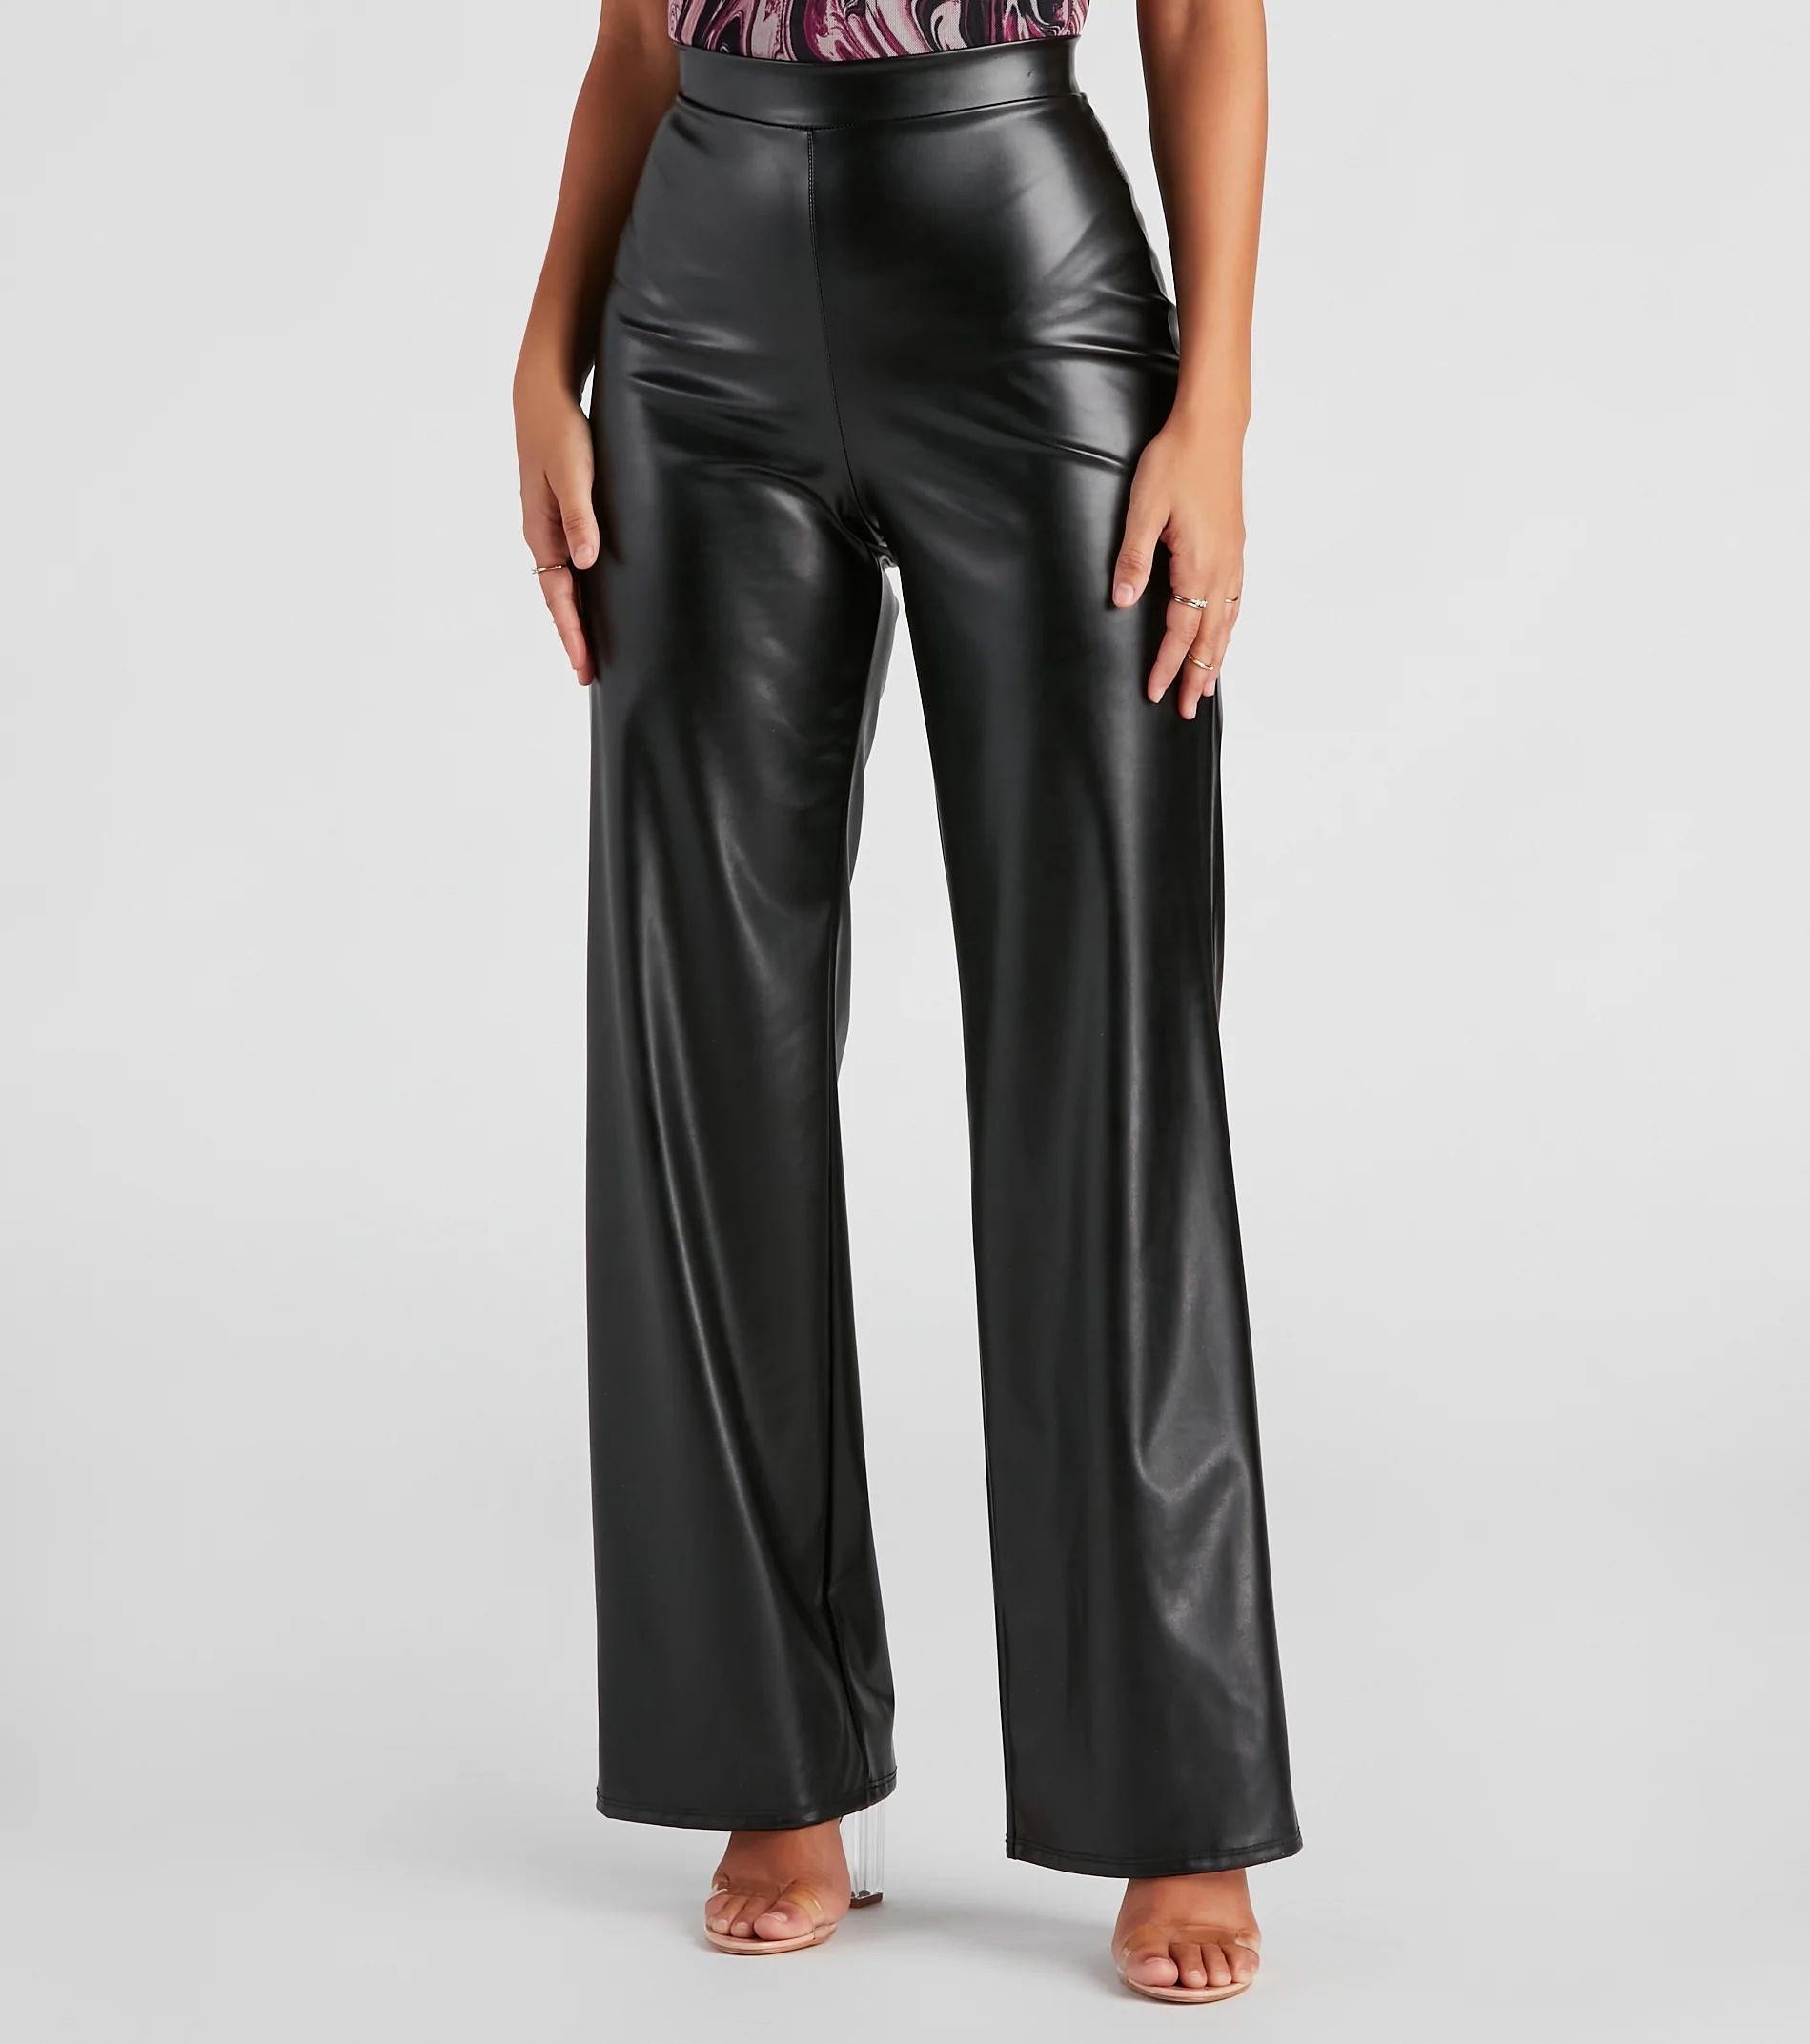 Totally Fab Faux Leather Pants | Windsor Stores